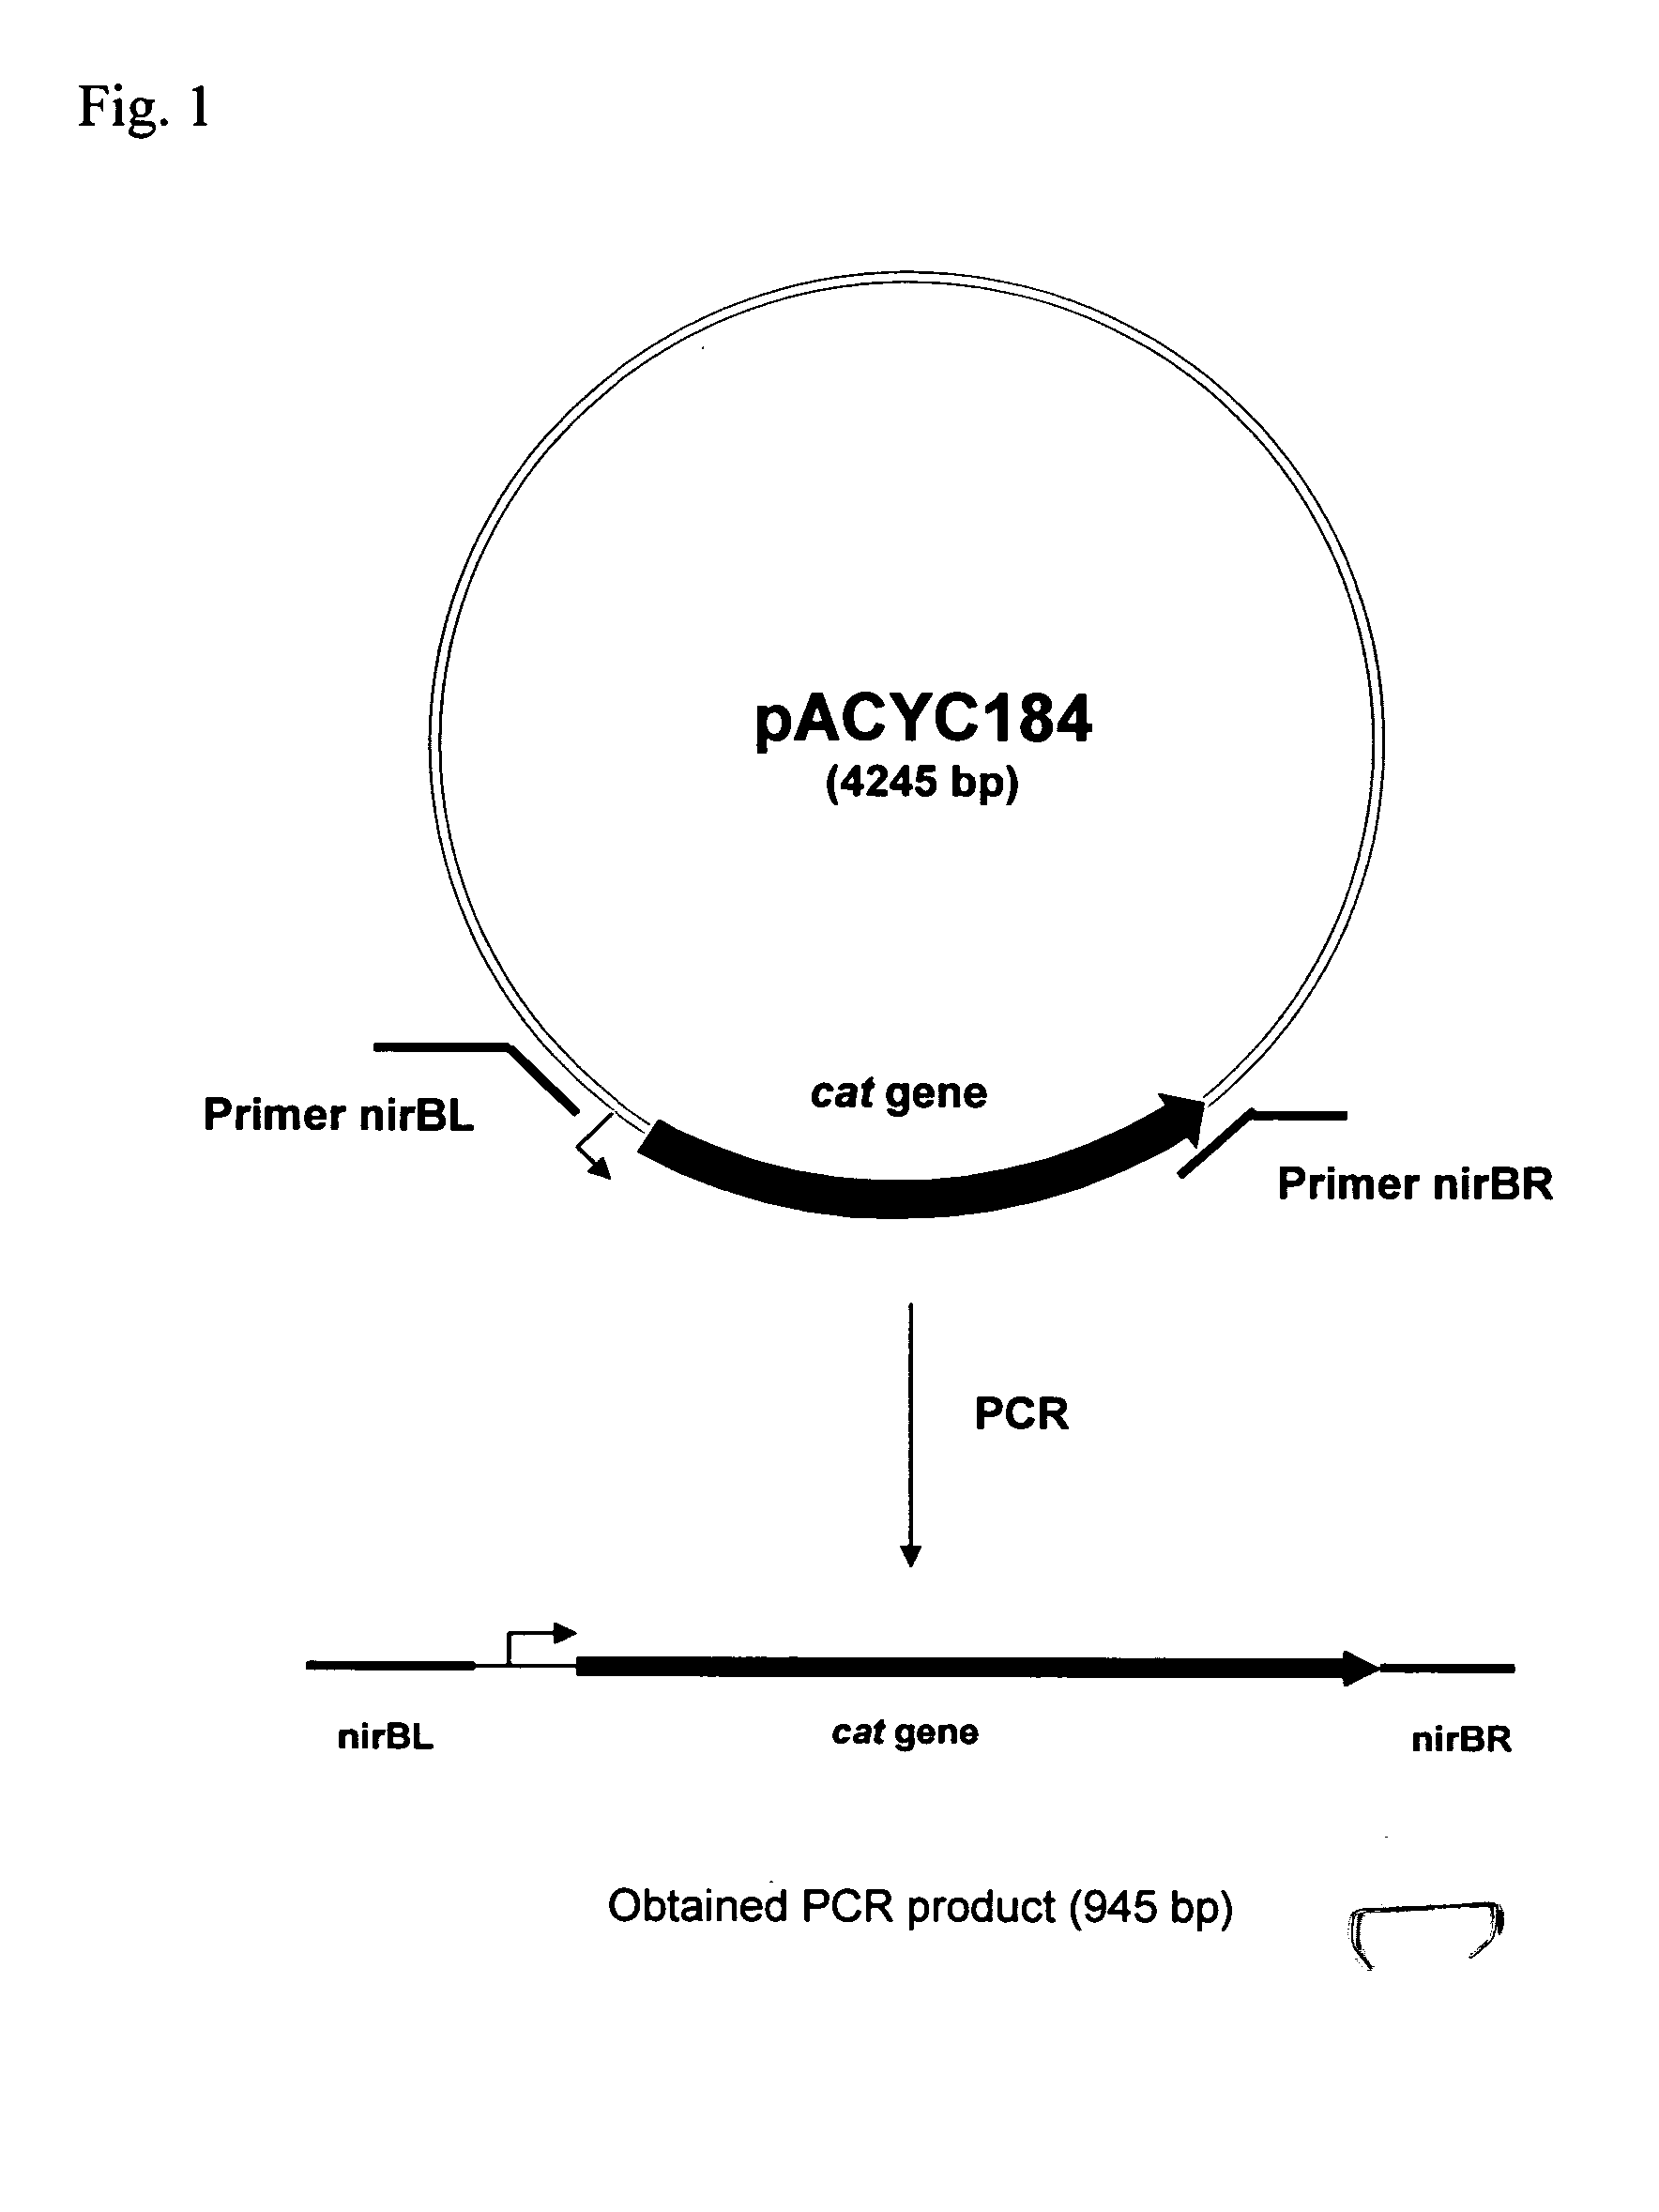 Method for producing L-amino acid using bacterium of Enterobacteriaceae family, having nir operon inactivated